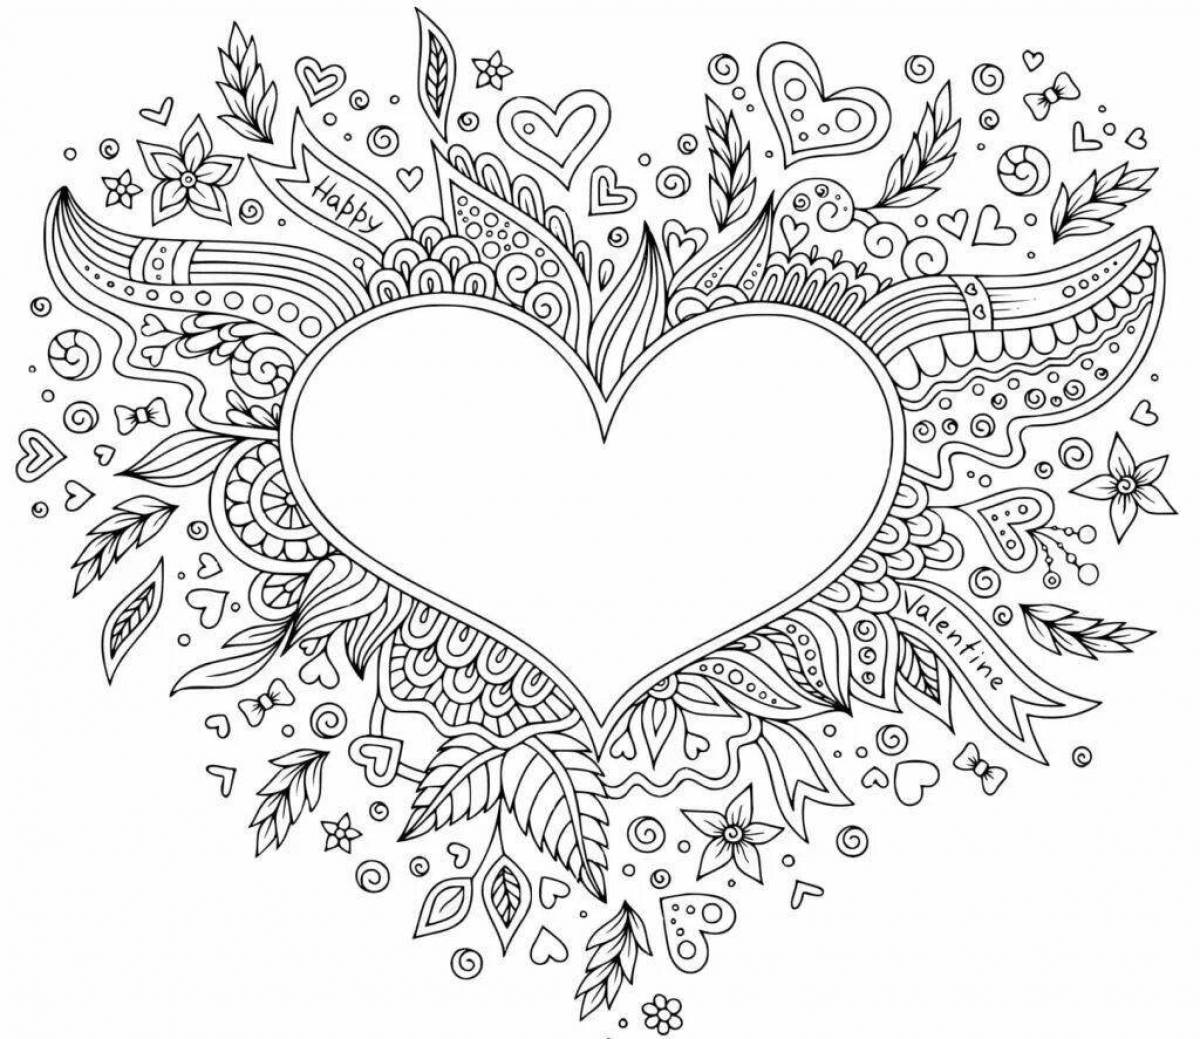 Intriguing complex heart coloring page